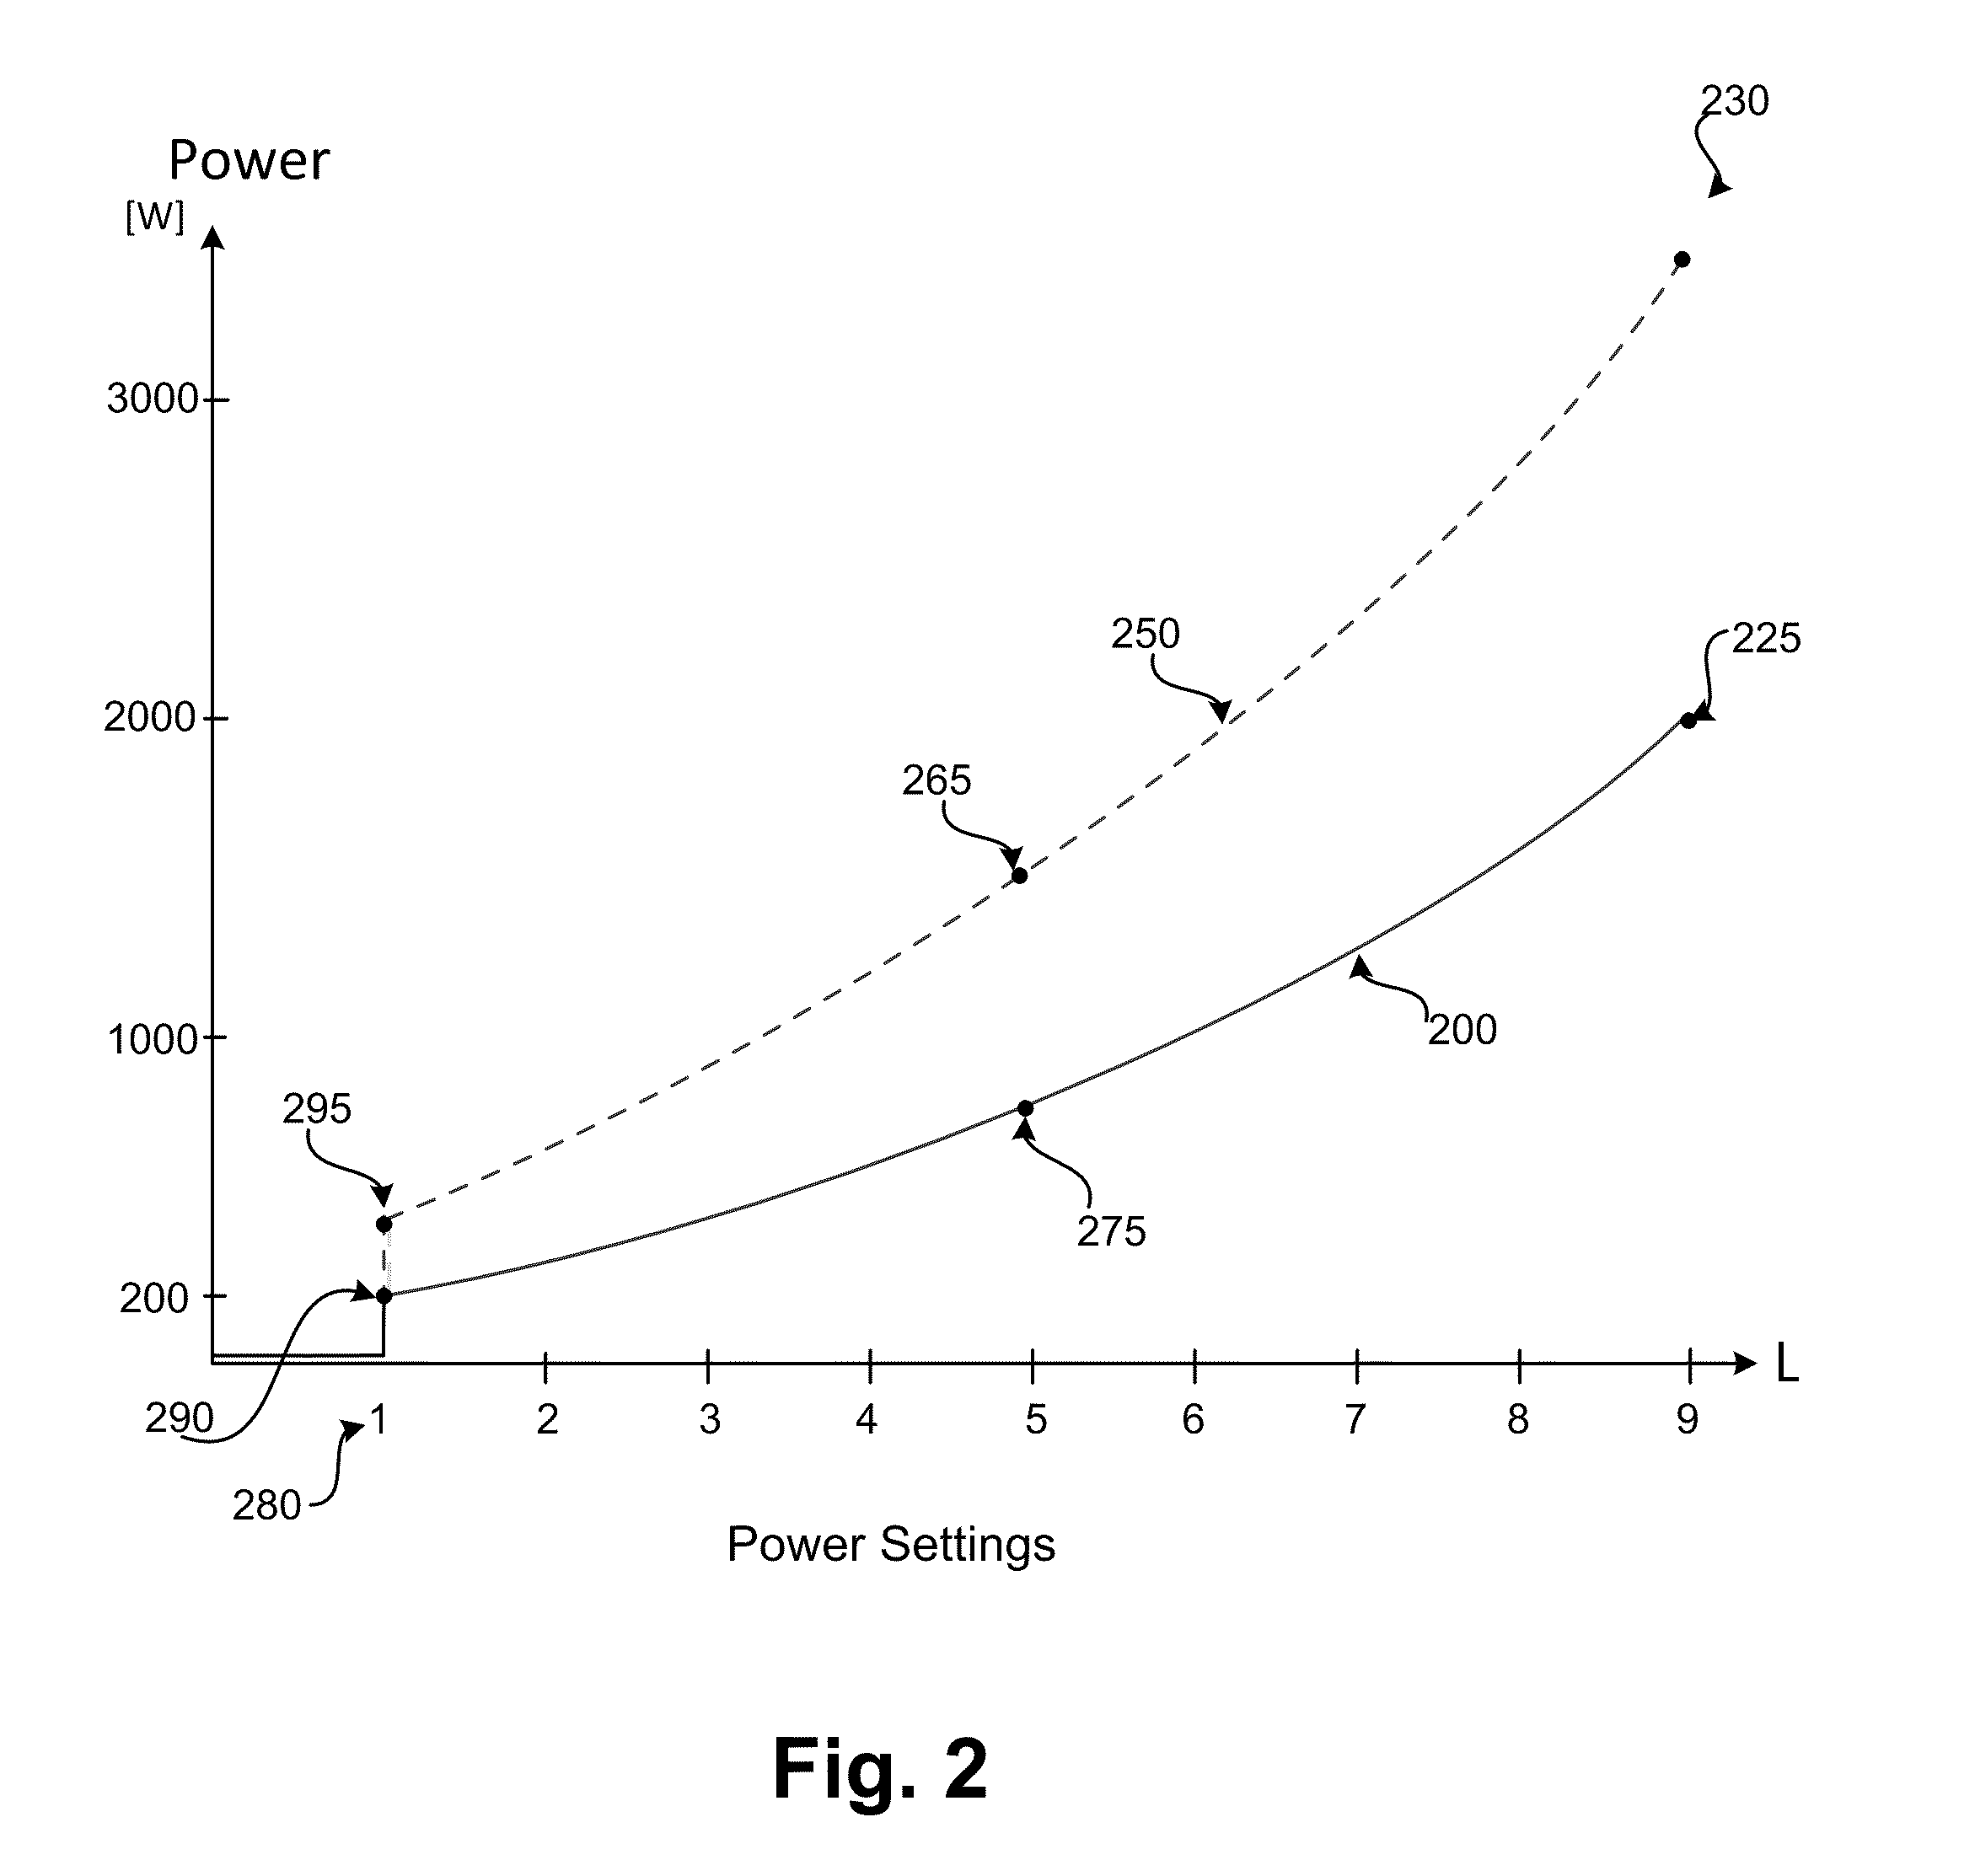 Method for Controlling a Gas Burner and a Hob with Several Gas Burners